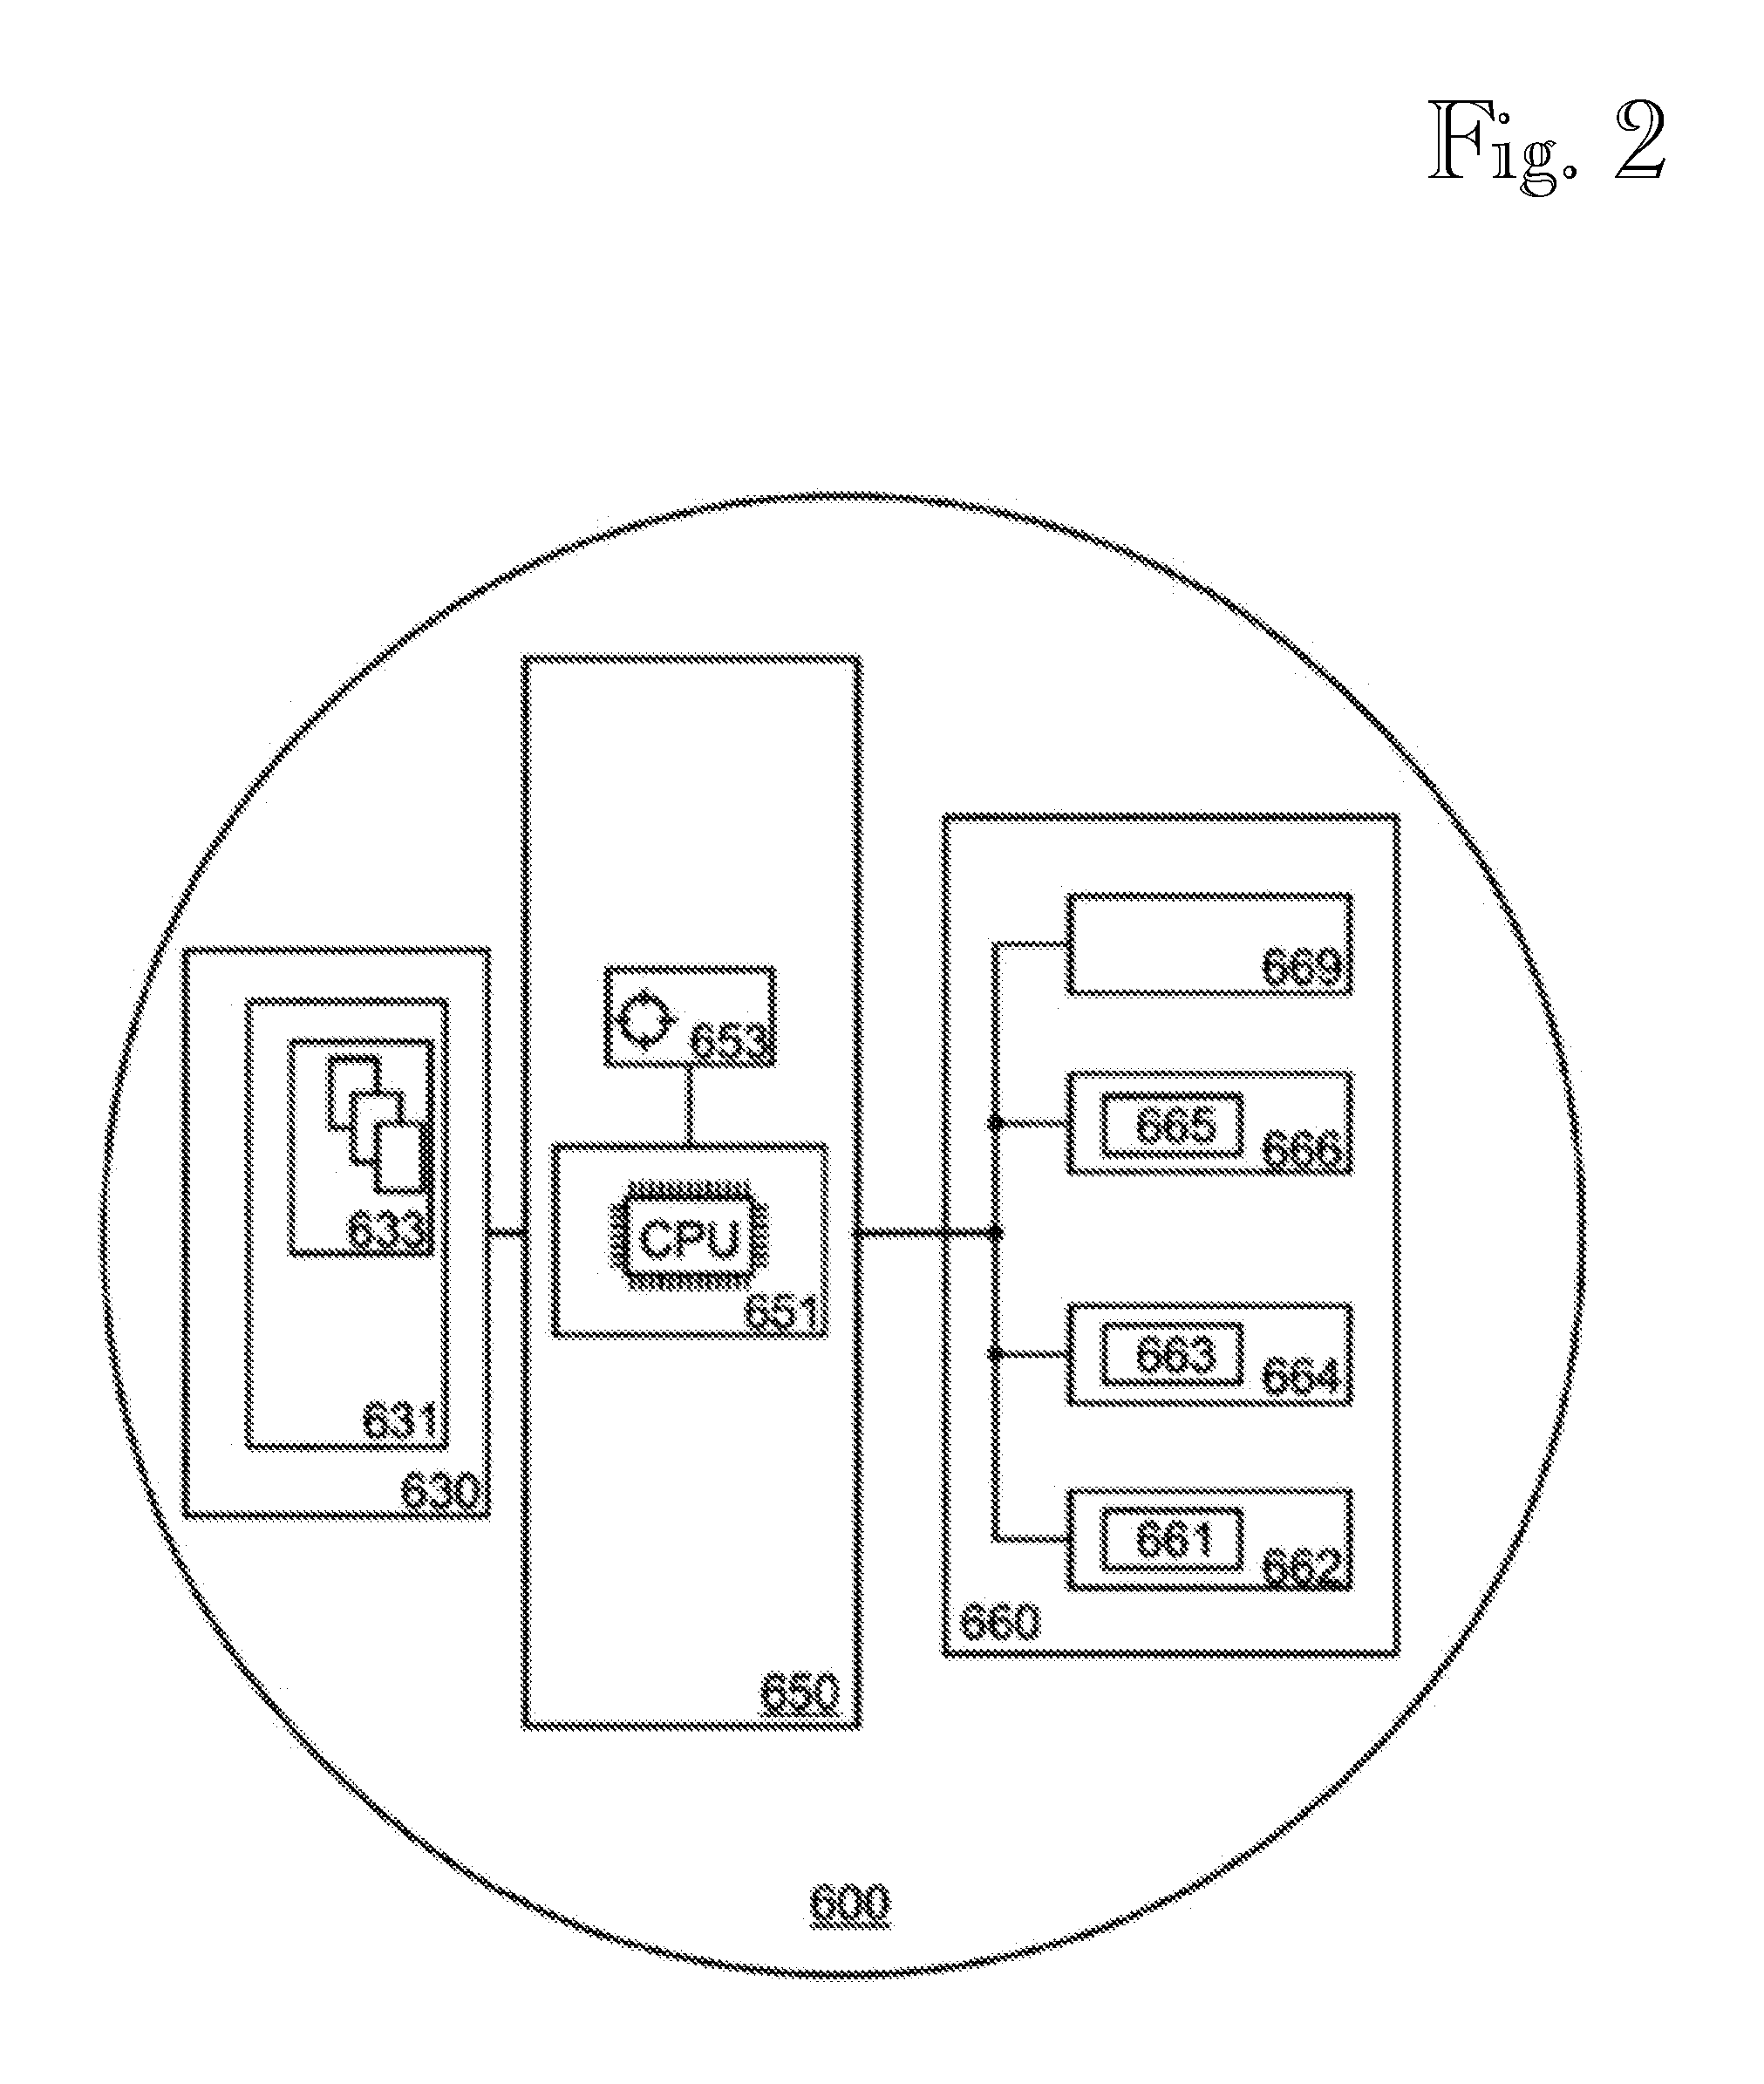 Method, system and computer program product for dynamically pricing perishable goods